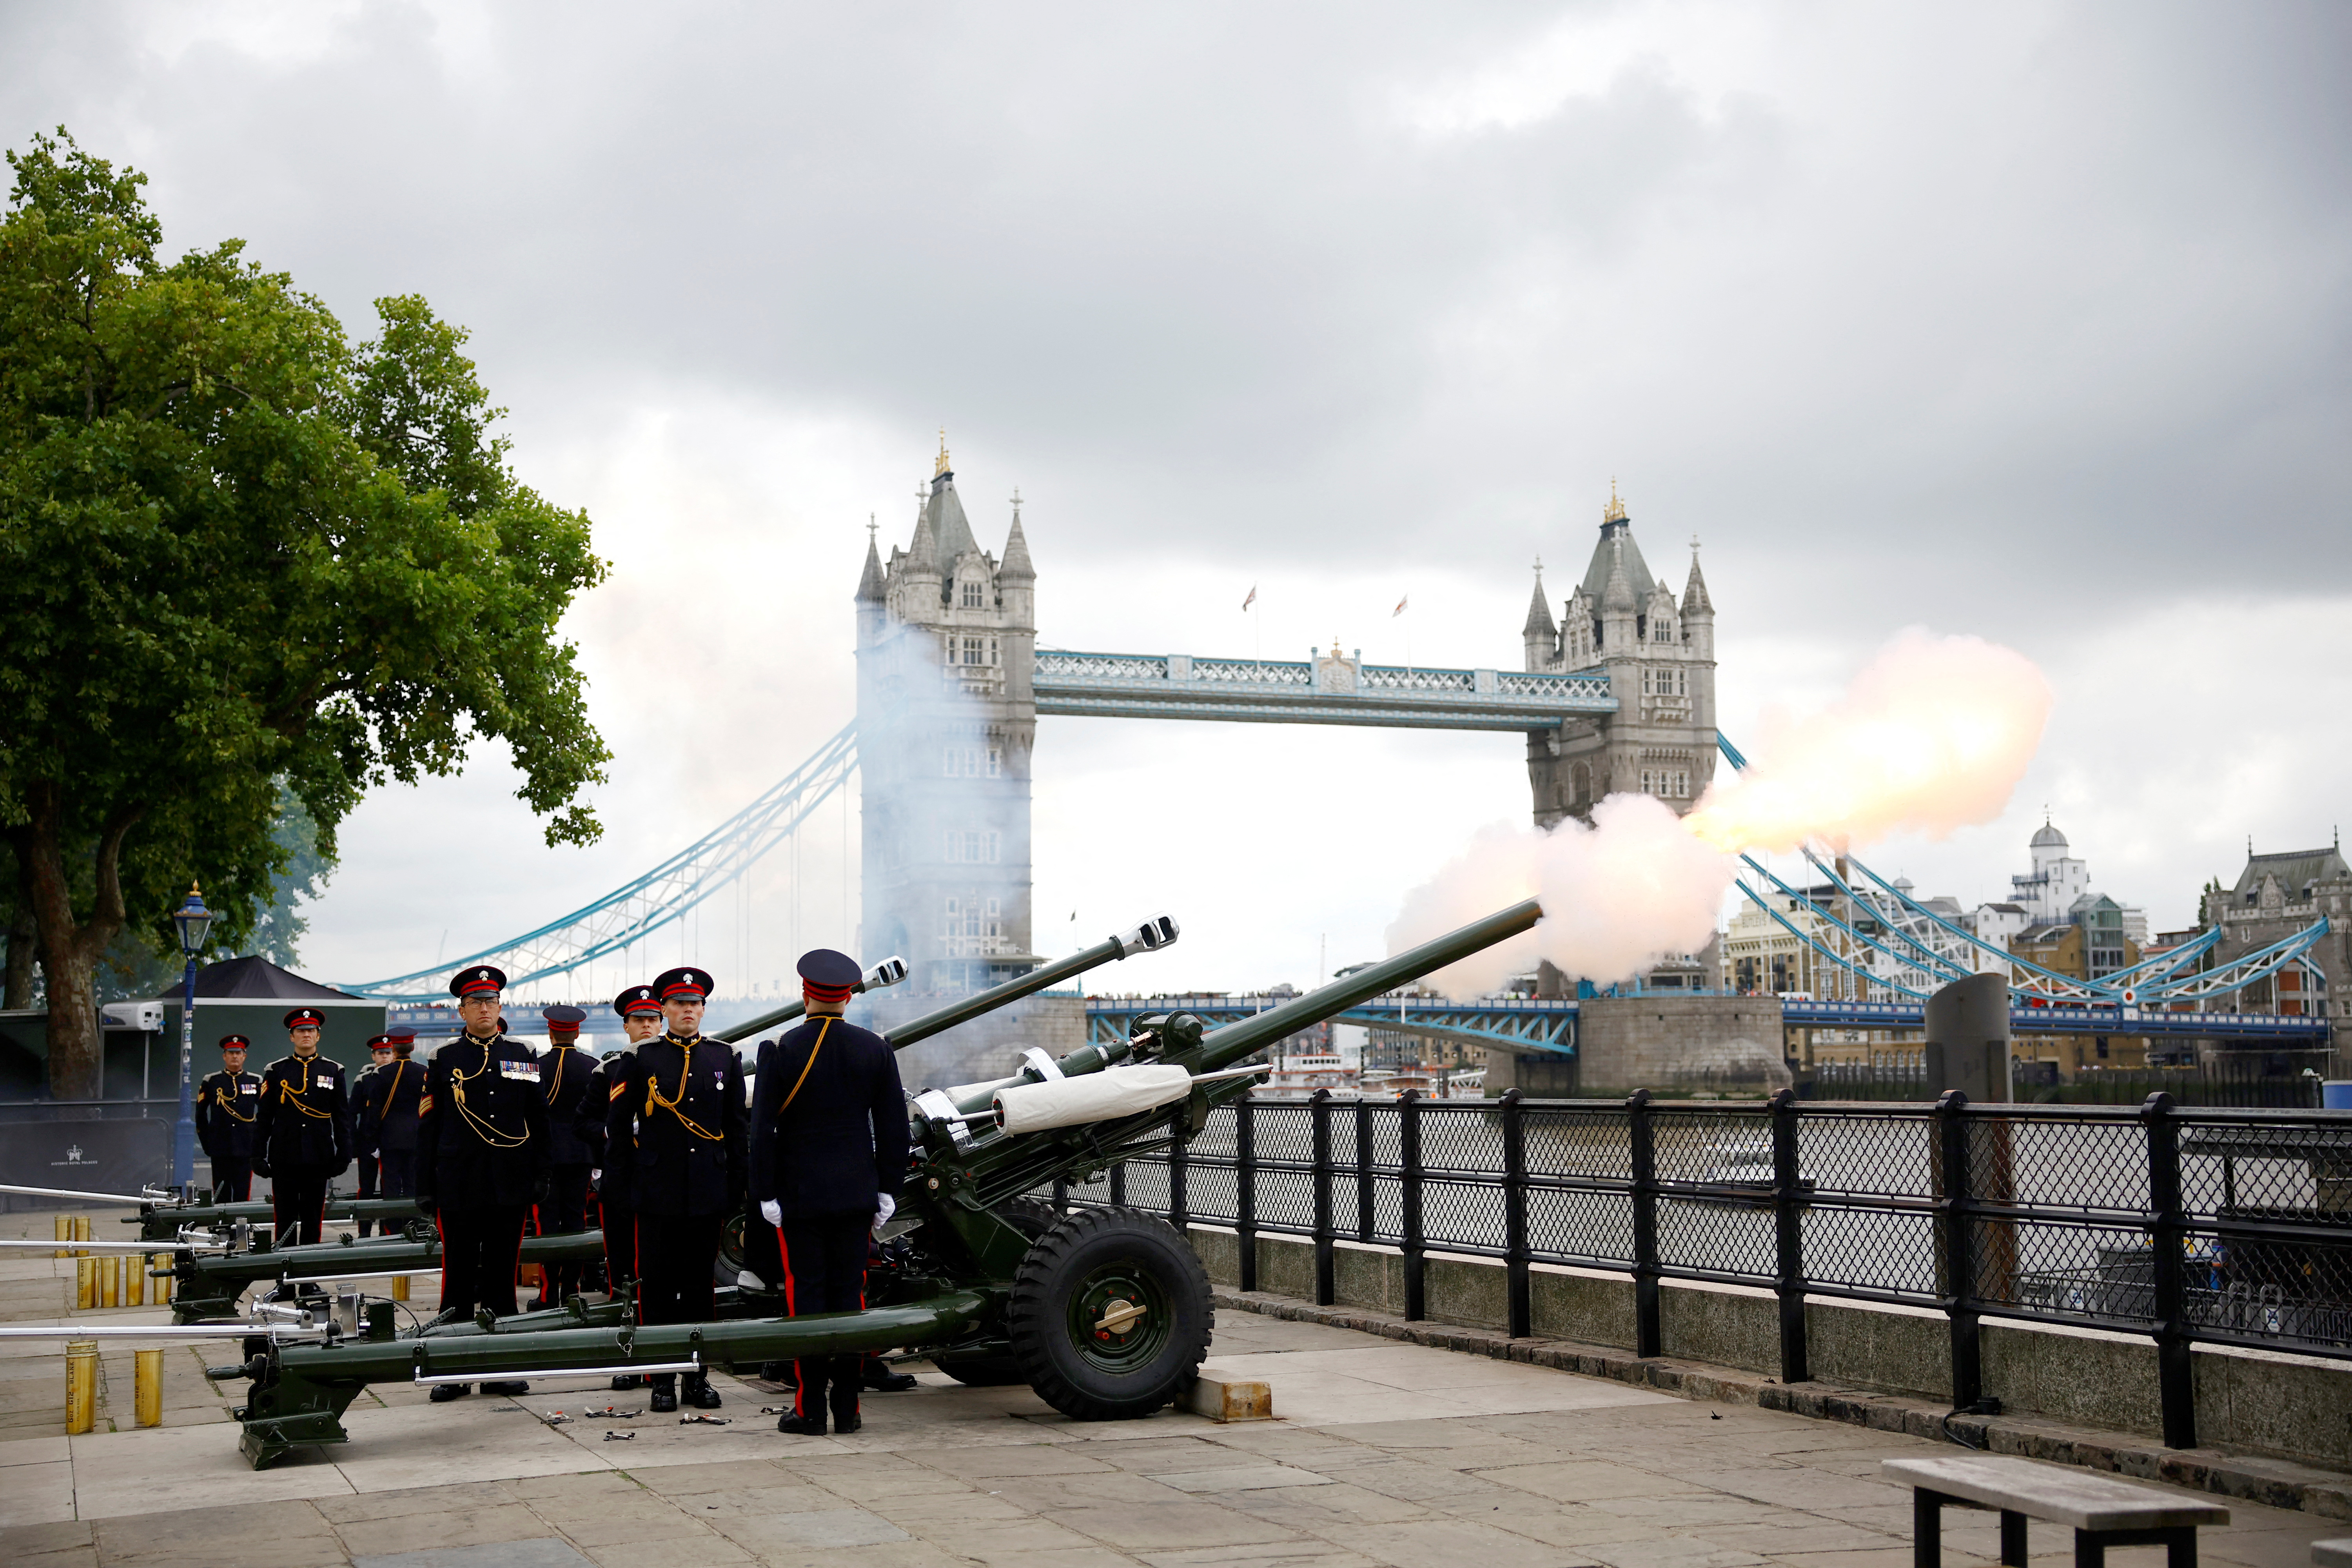 A gun salute is fired for Britain's King Charles at the Tower of London, following the death of Queen Elizabeth, in London, Britain, September 10, 2022. REUTERS/Sarah Meyssonnier